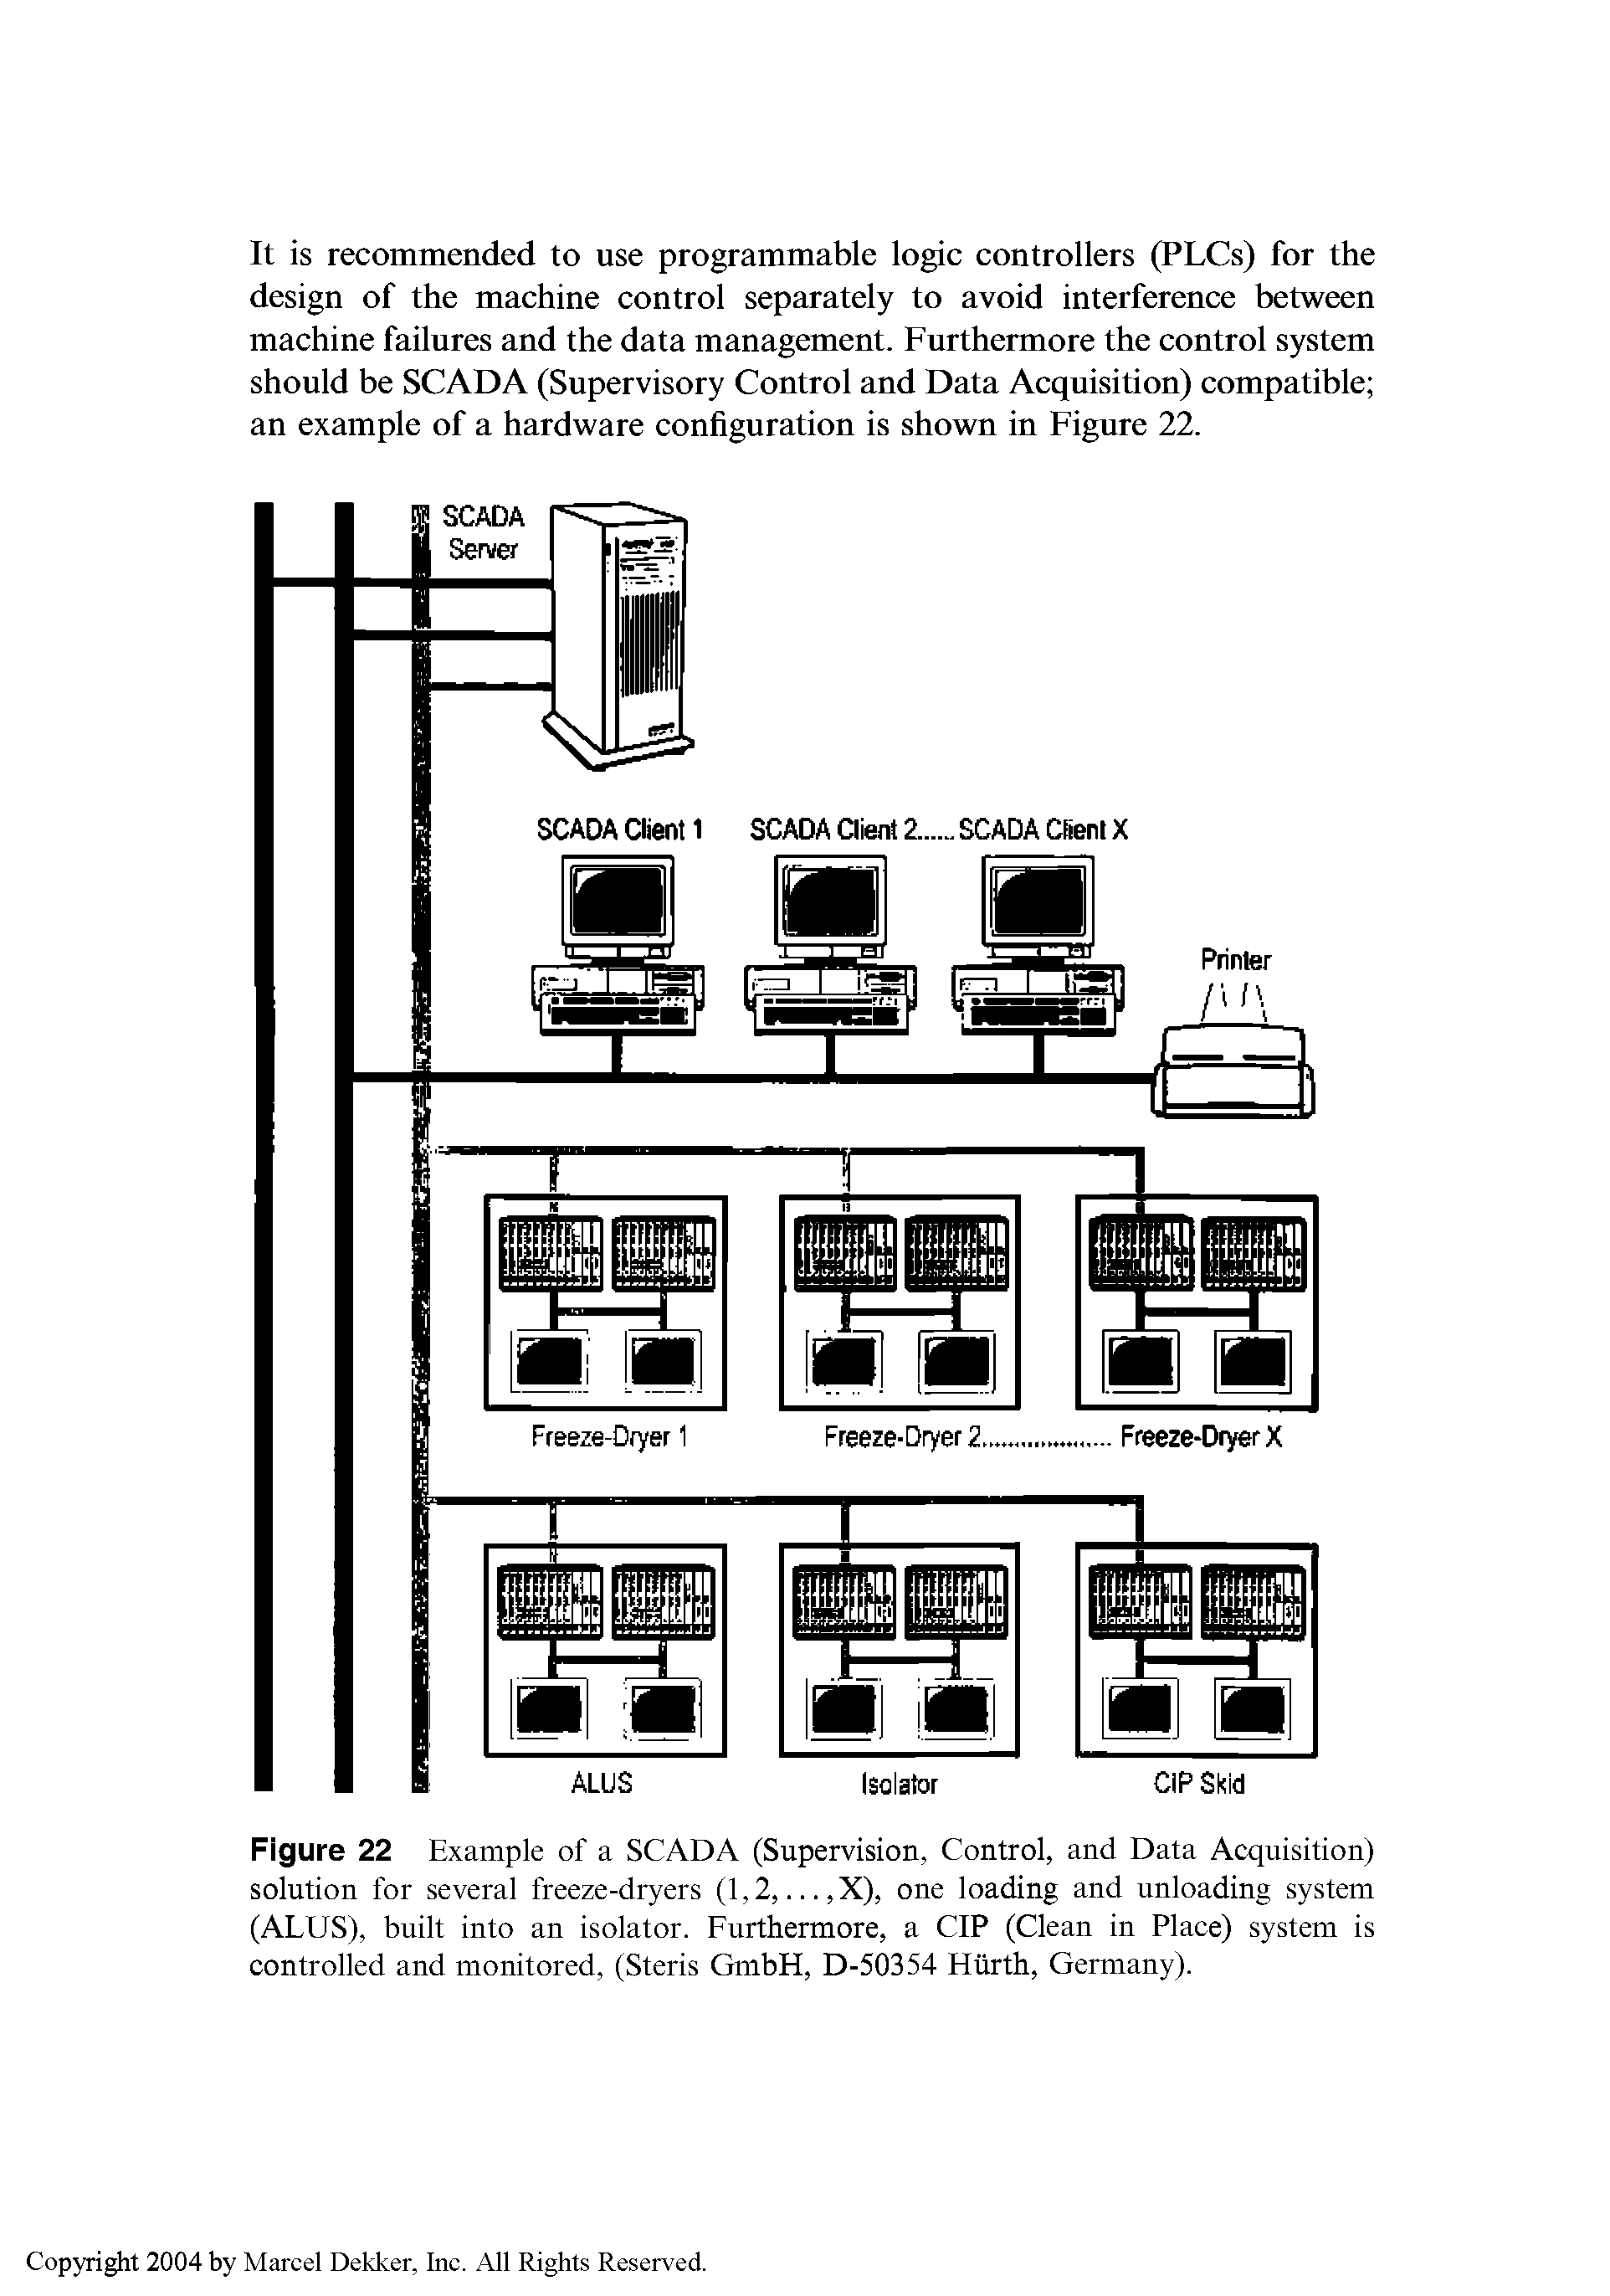 Figure 22 Example of a SCADA (Supervision, Control, and Data Acquisition) solution for several freeze-dryers (1,2,. ..,X), one loading and unloading system (ALUS), built into an isolator. Furthermore, a CIP (Clean in Place) system is controlled and monitored, (Steris GmbH, D-50354 Hurth, Germany).